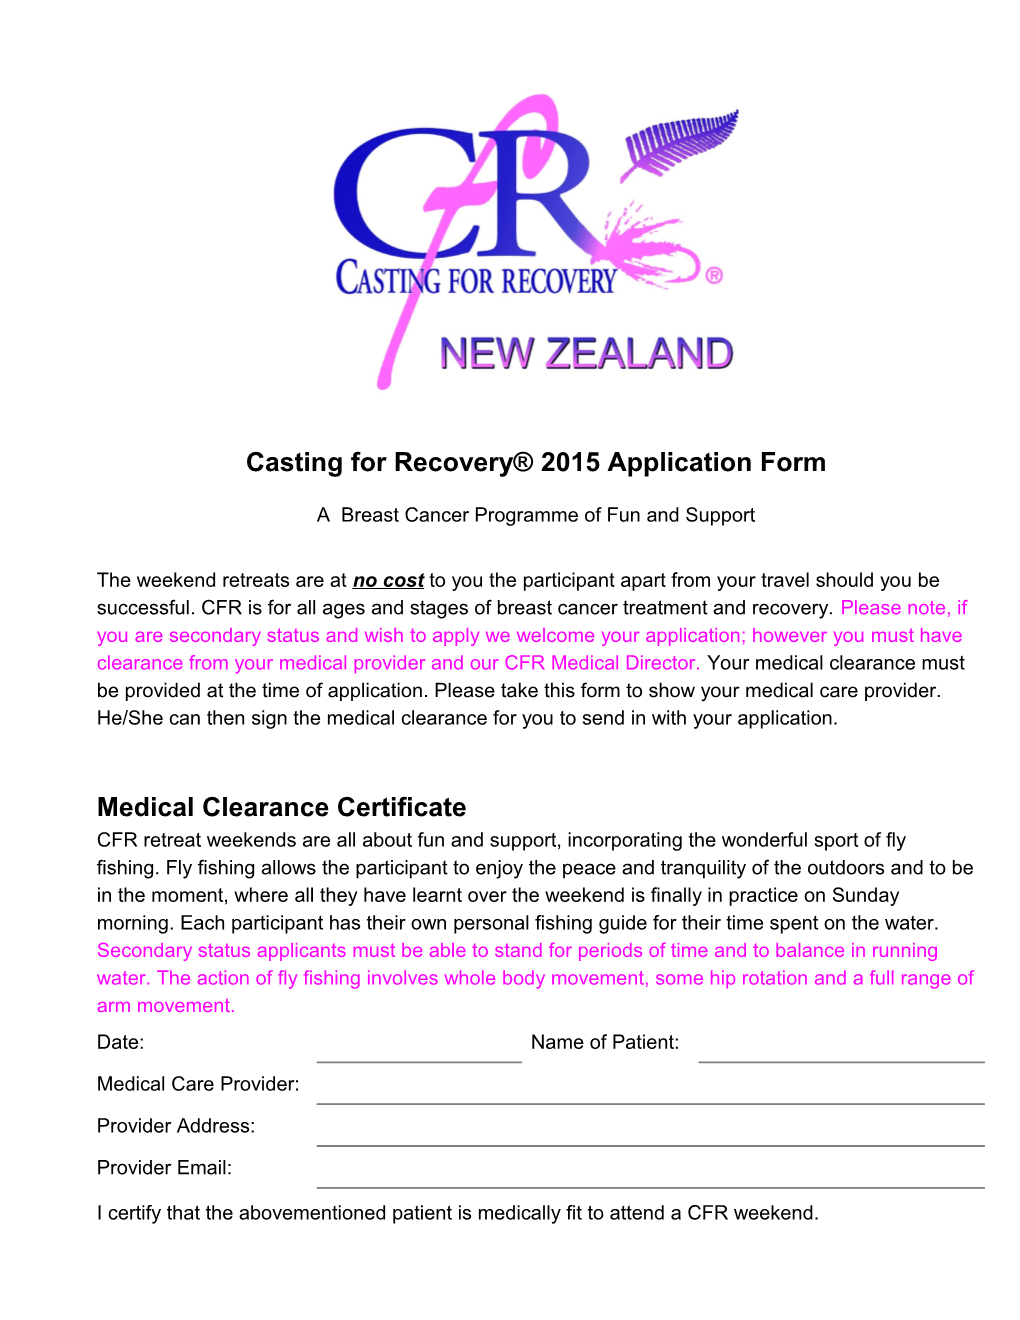 Casting for Recovery 2015 Application Form